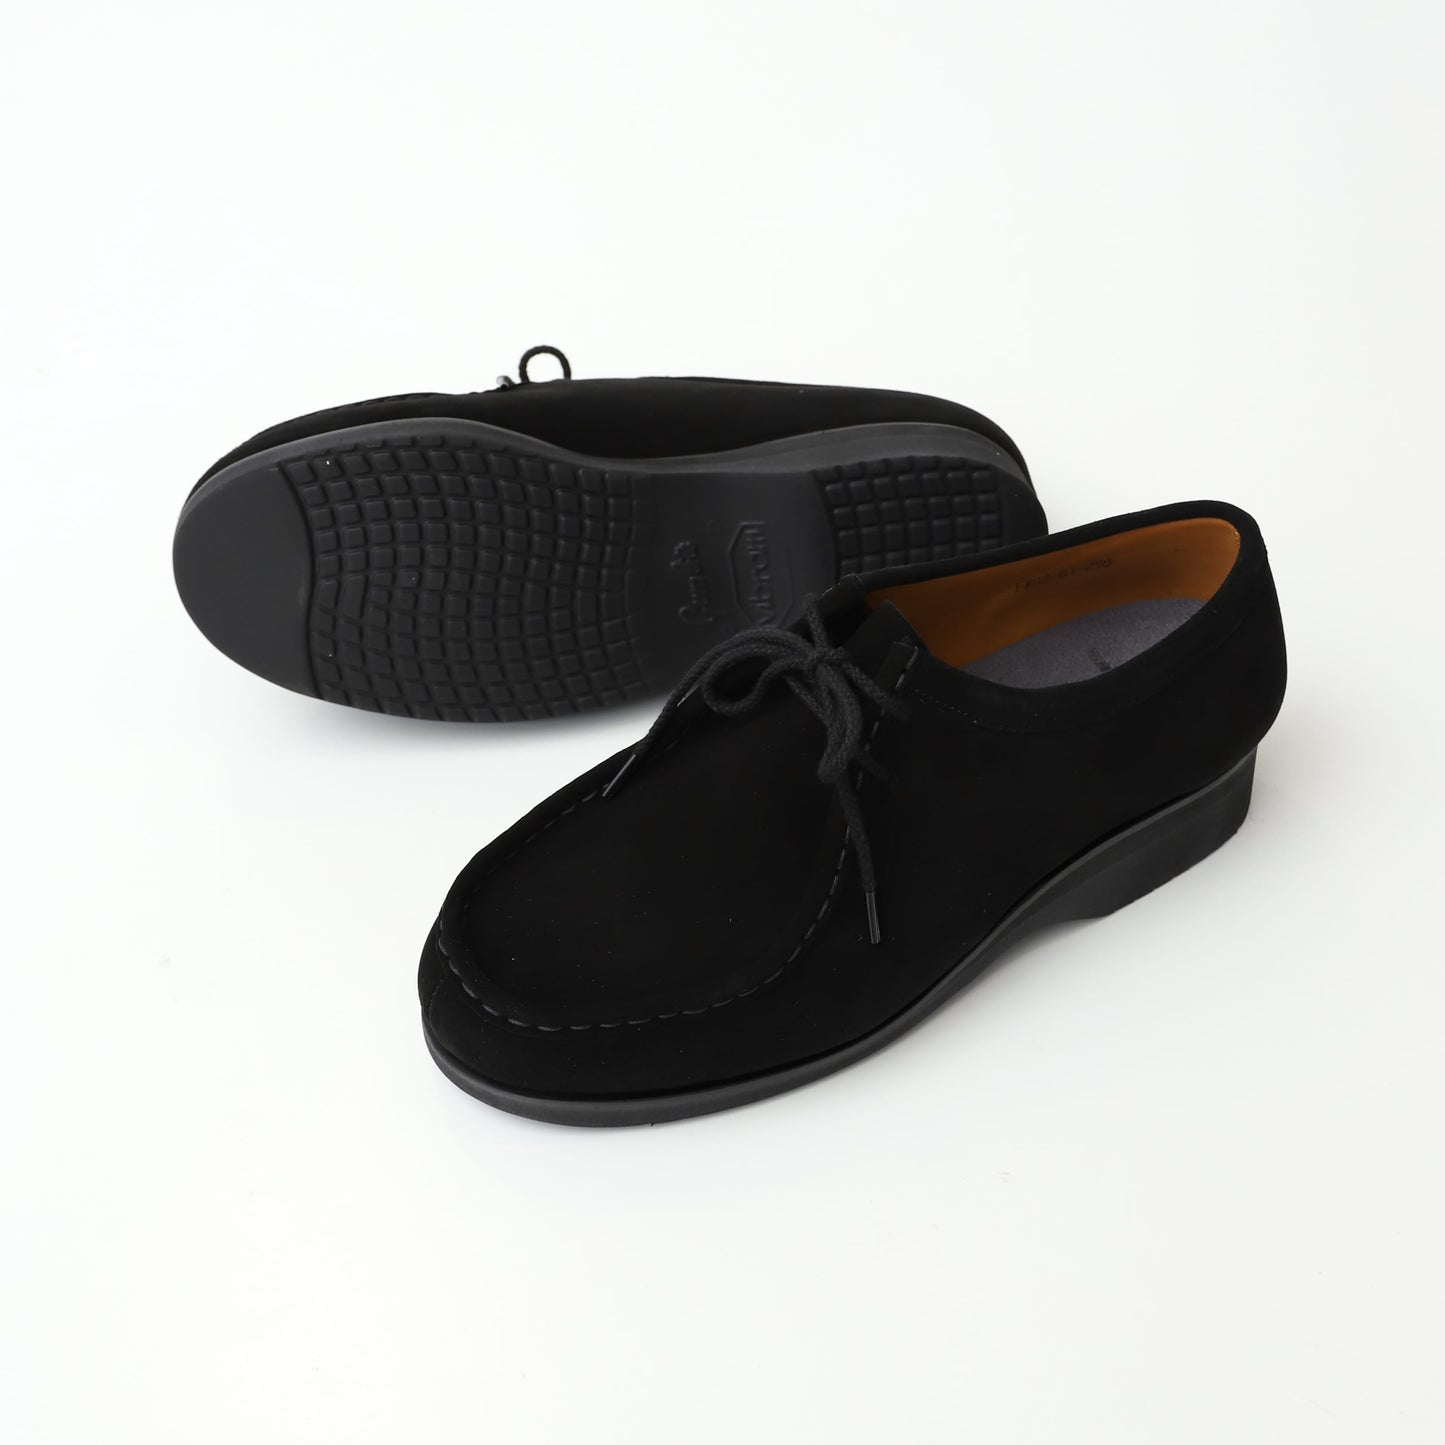 Tirolean shoes_Suede leather BLACK